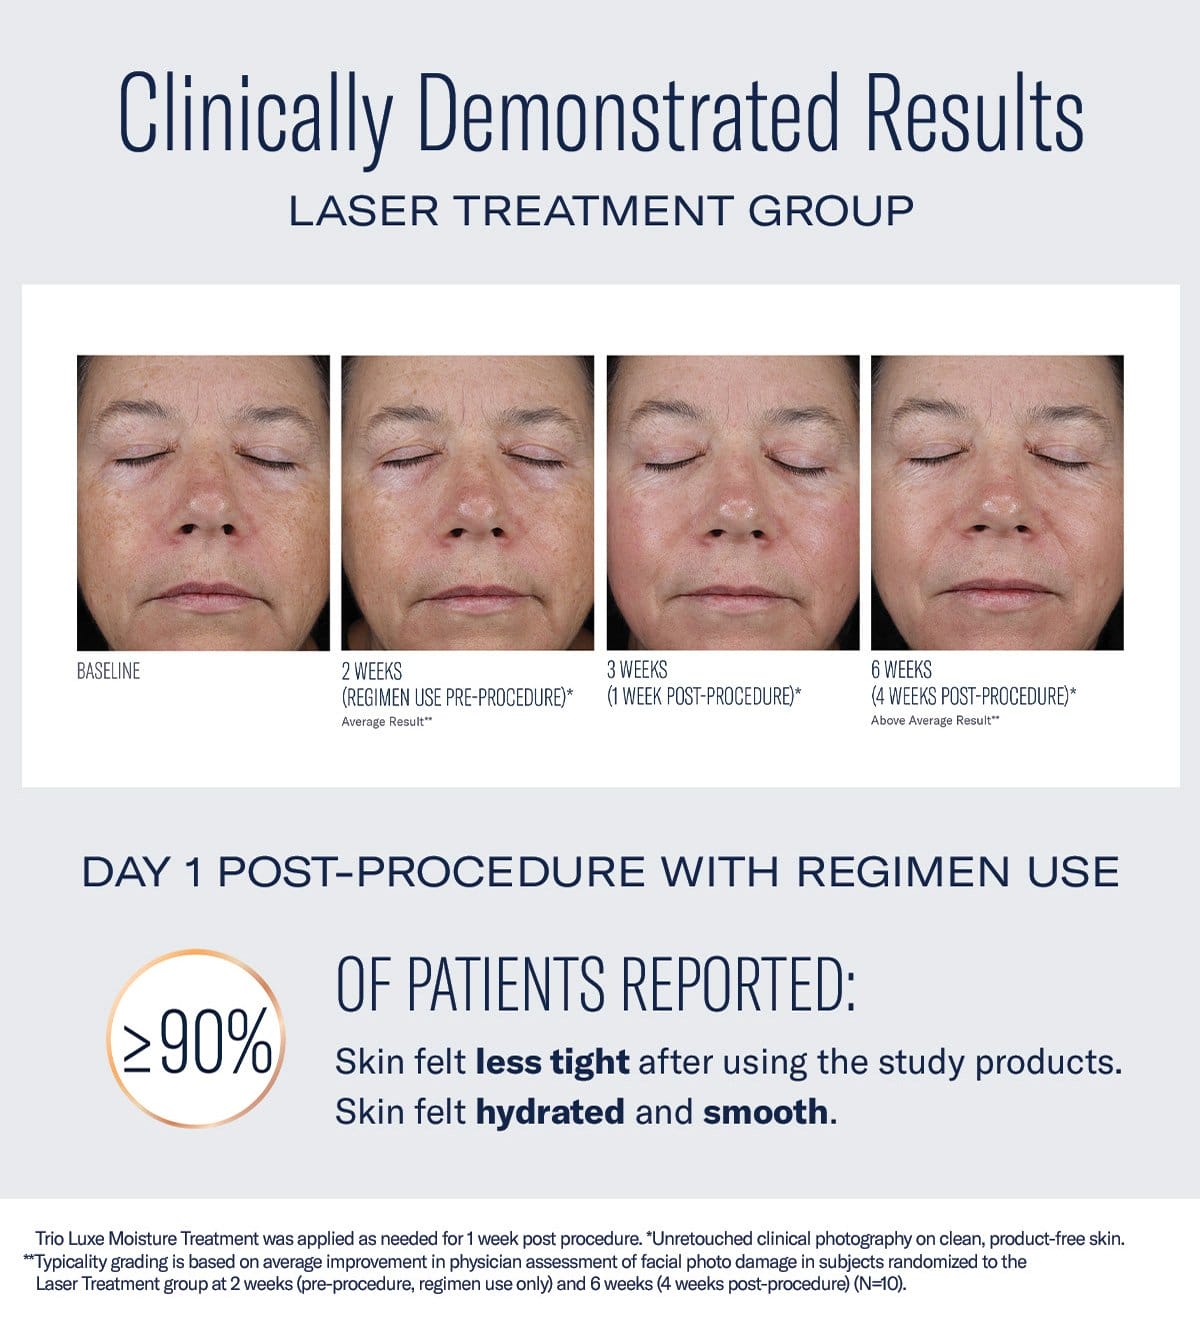 Clinically Demonstrated Results: LASER TREATMENT GROUP